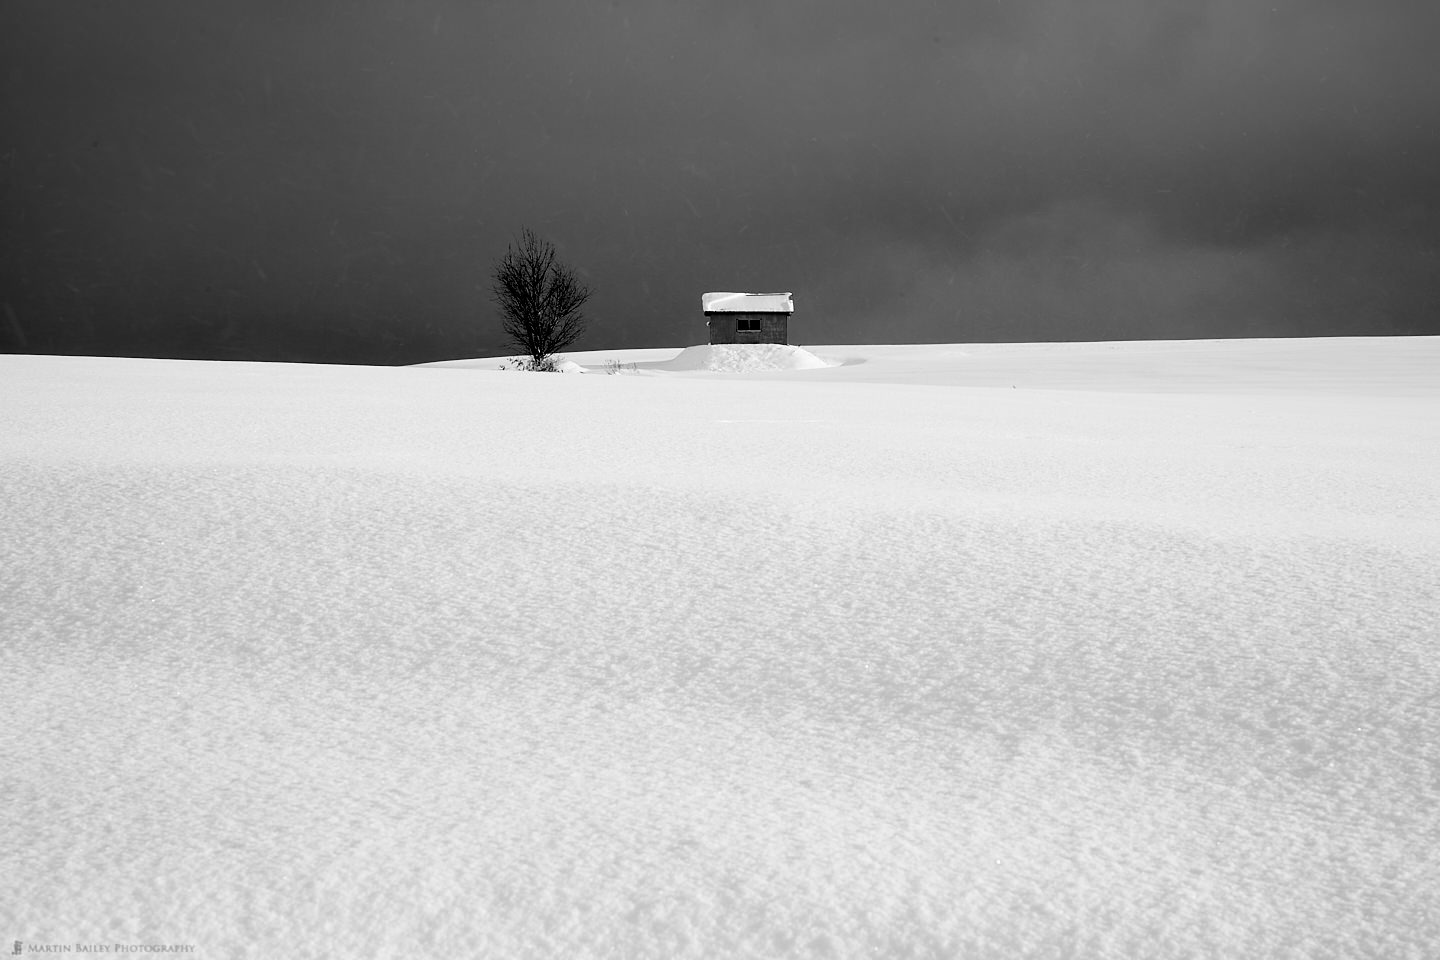 Hut and Tree on Hill